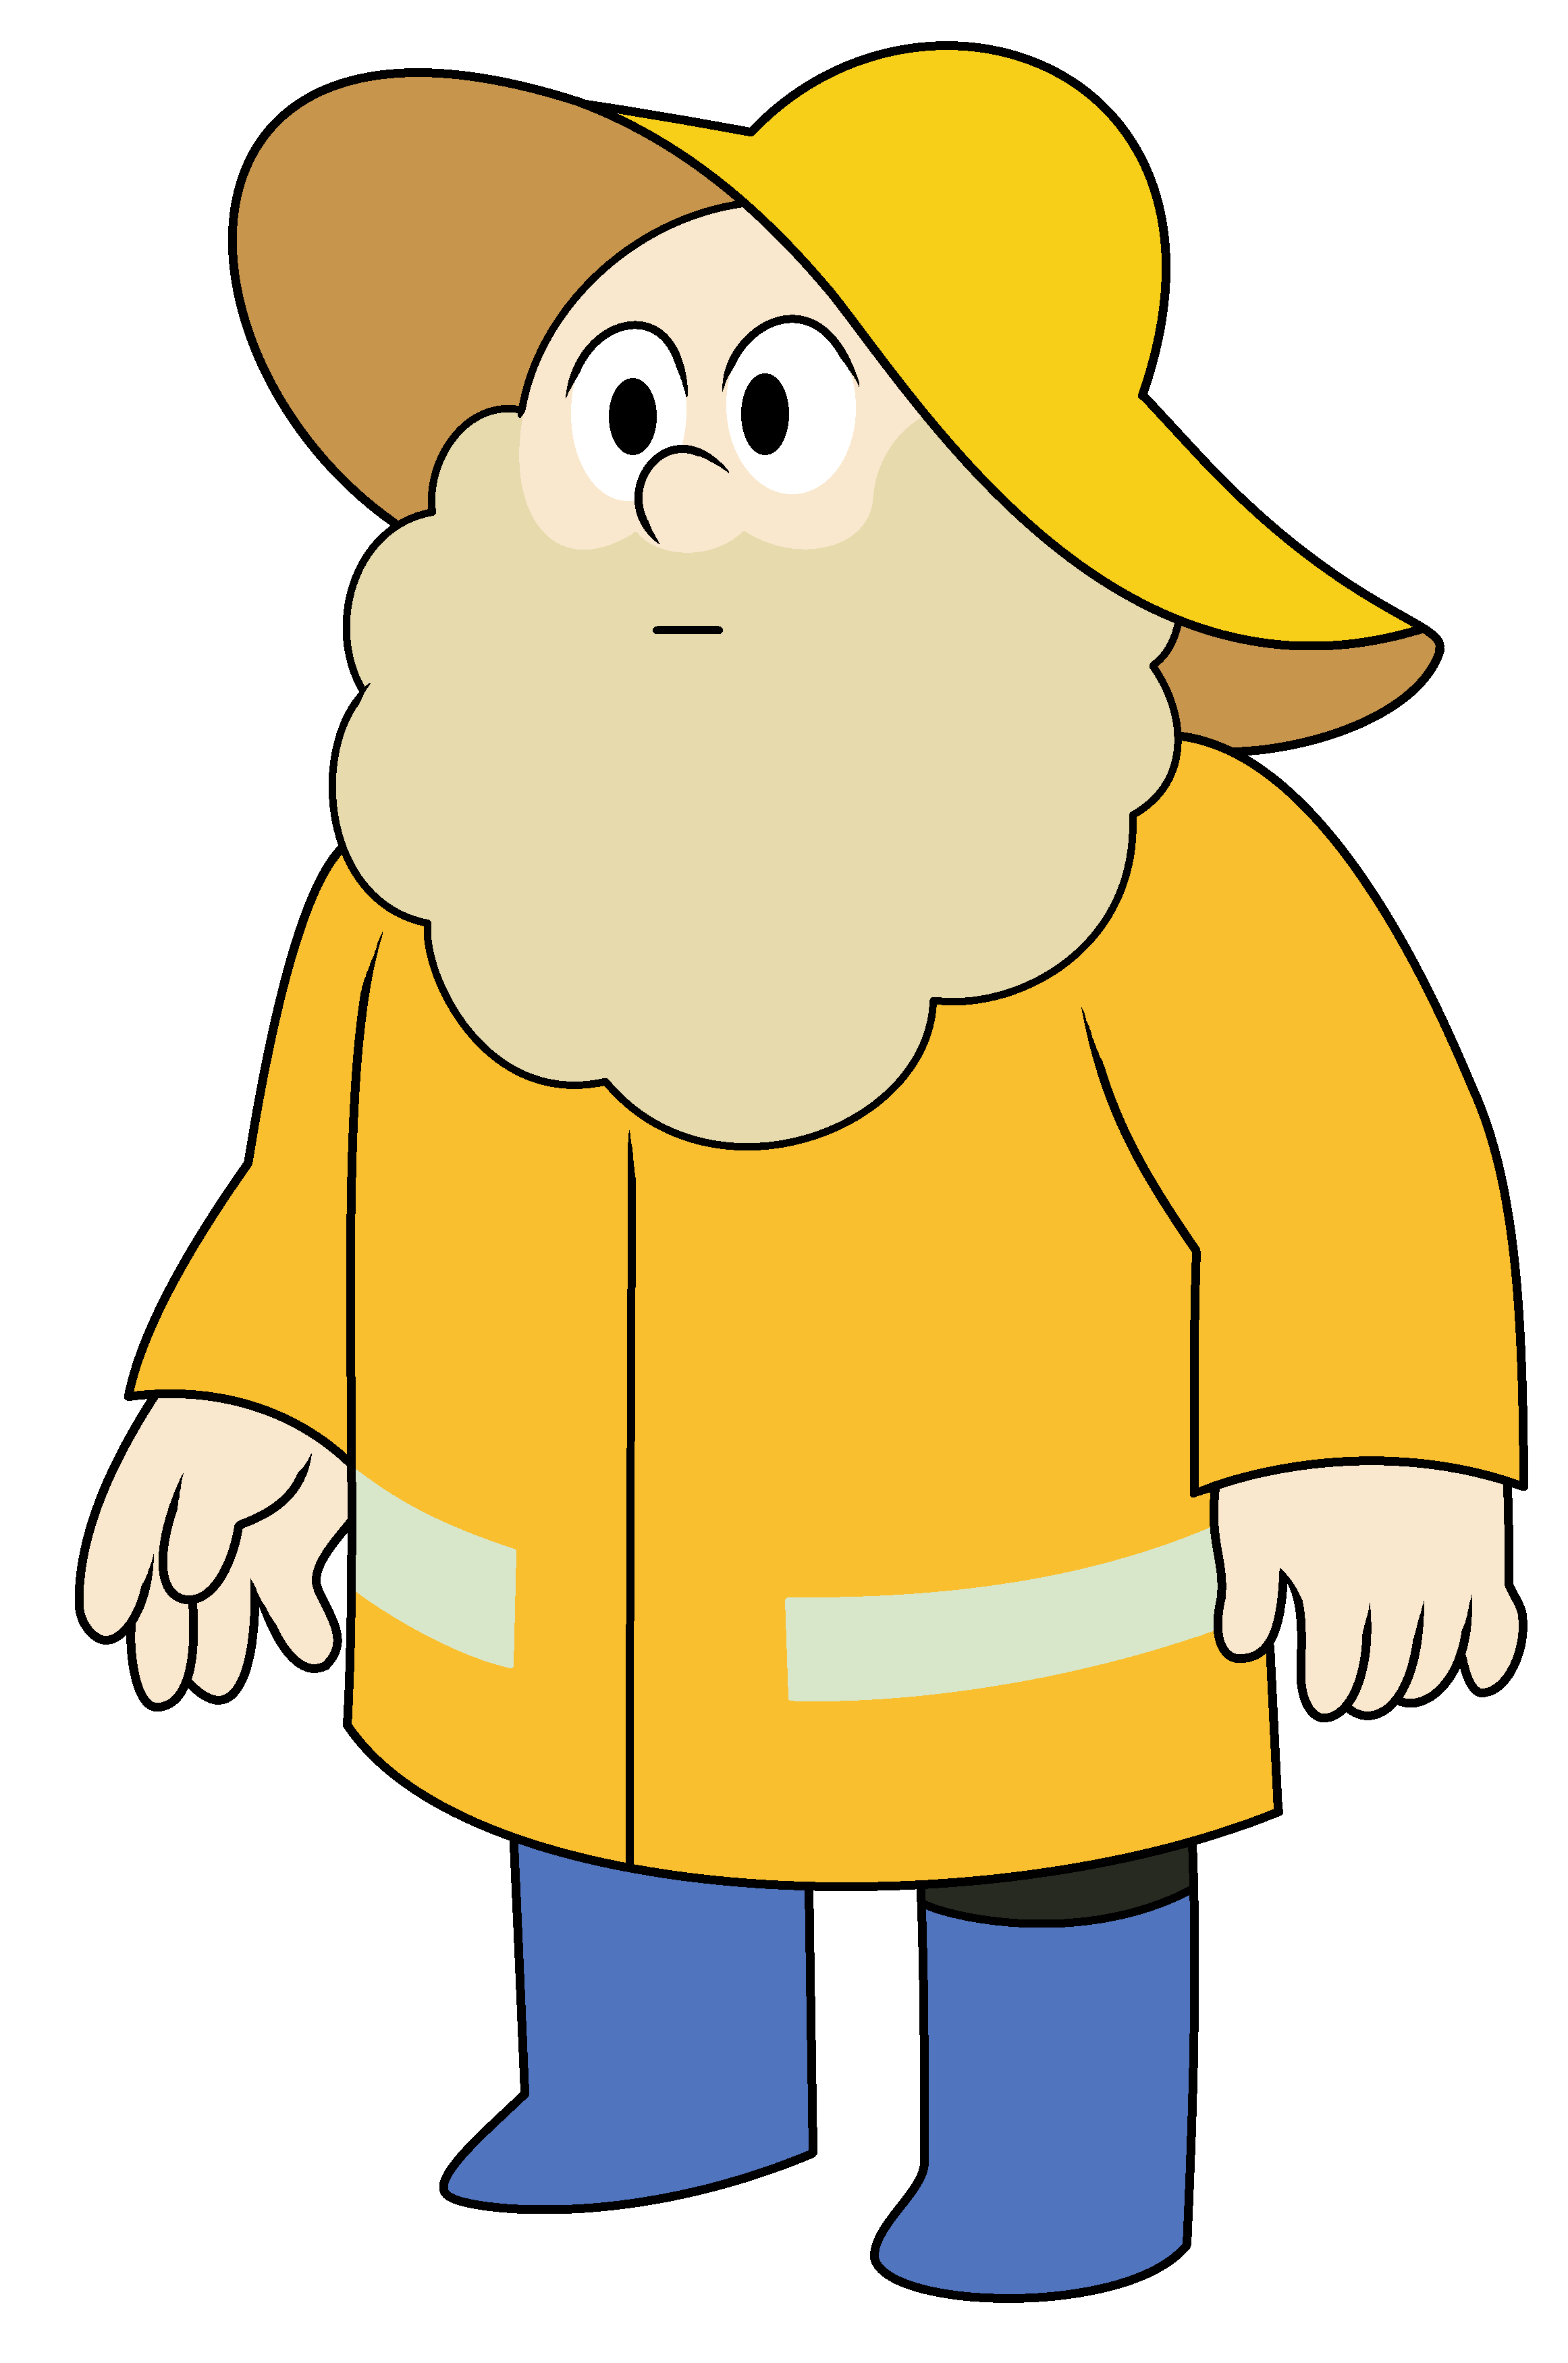 Young clipart old father. Yellowtail steven universe wiki